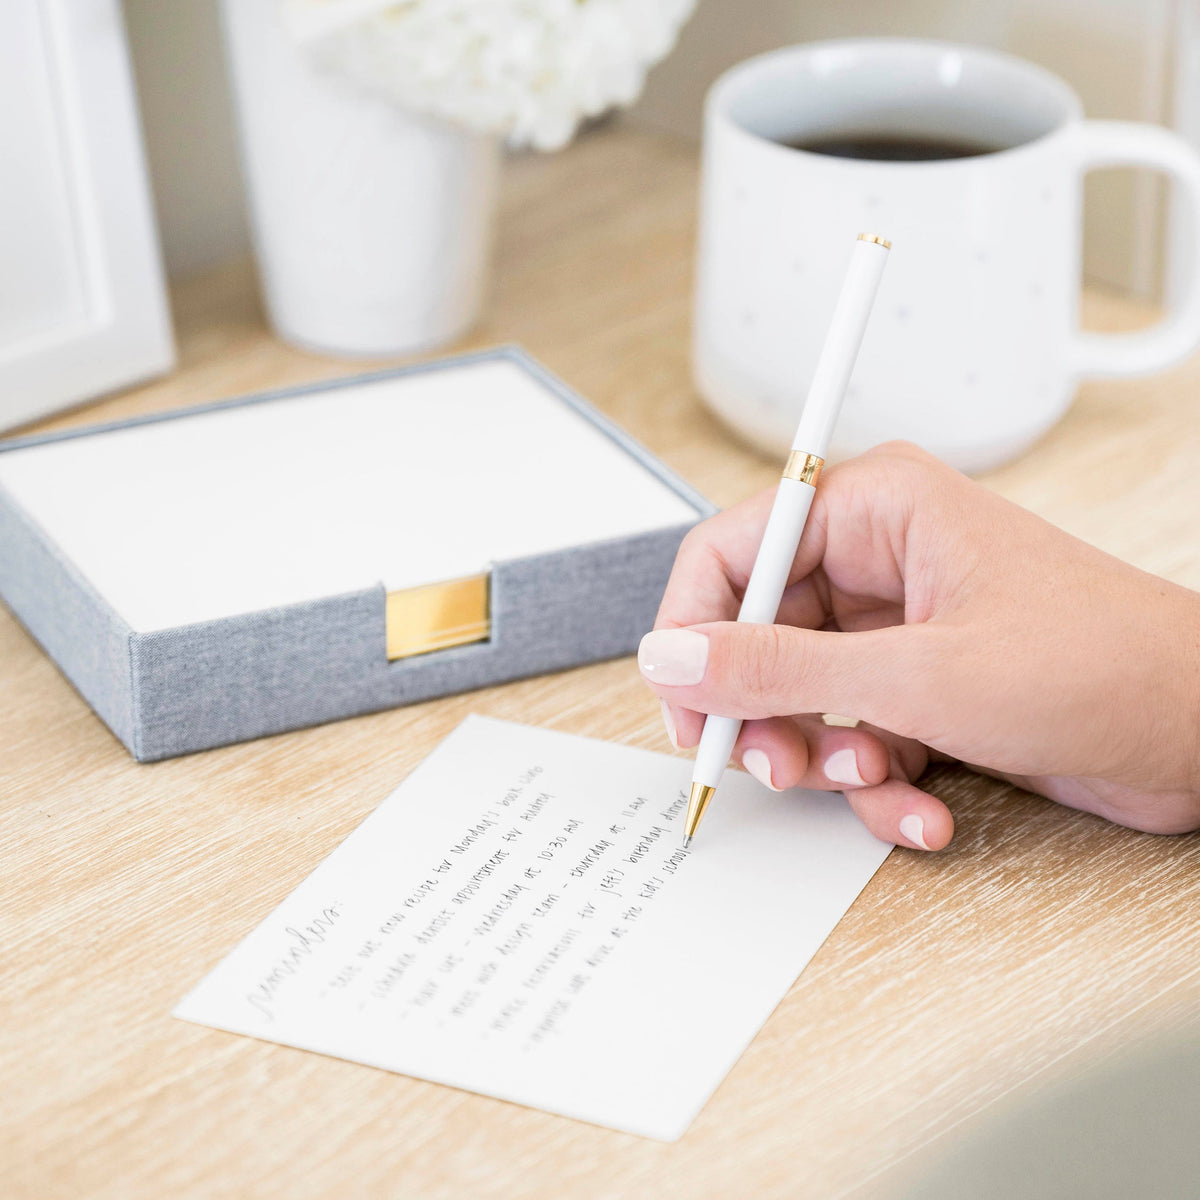 Chambray desk jotter on desk with person writing on note